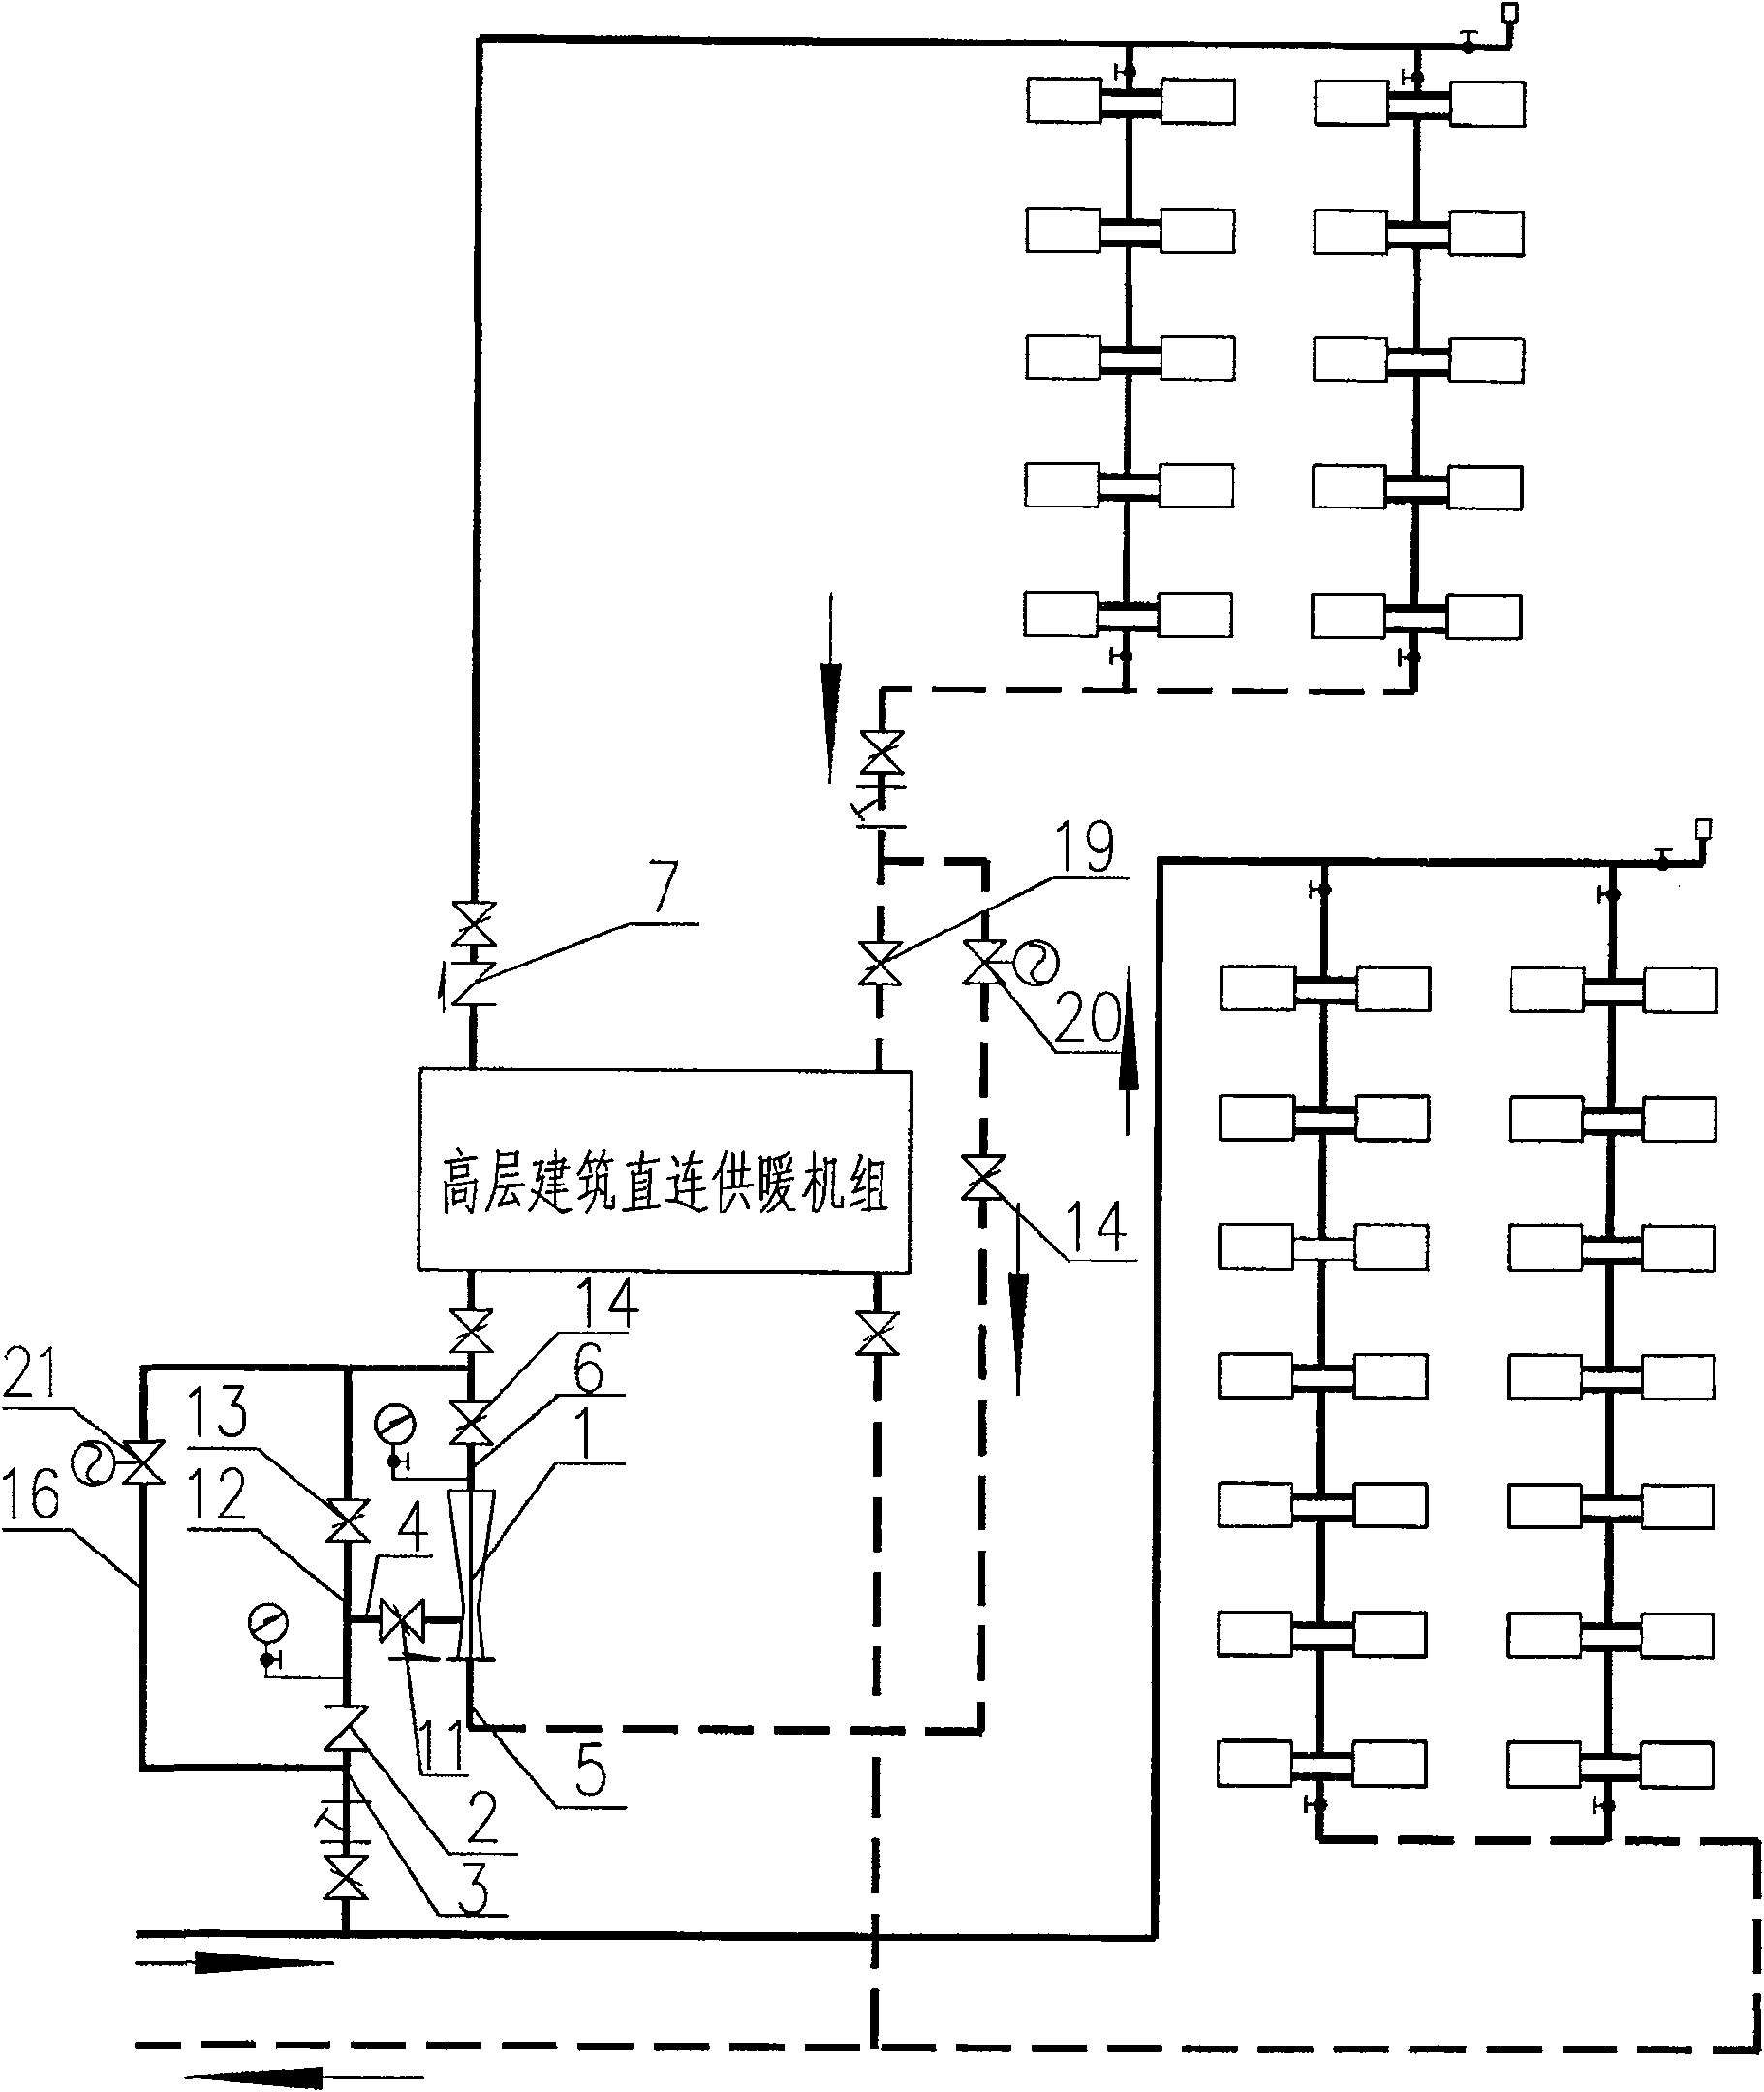 Direct connection heating self-compressing unit for high-rise building